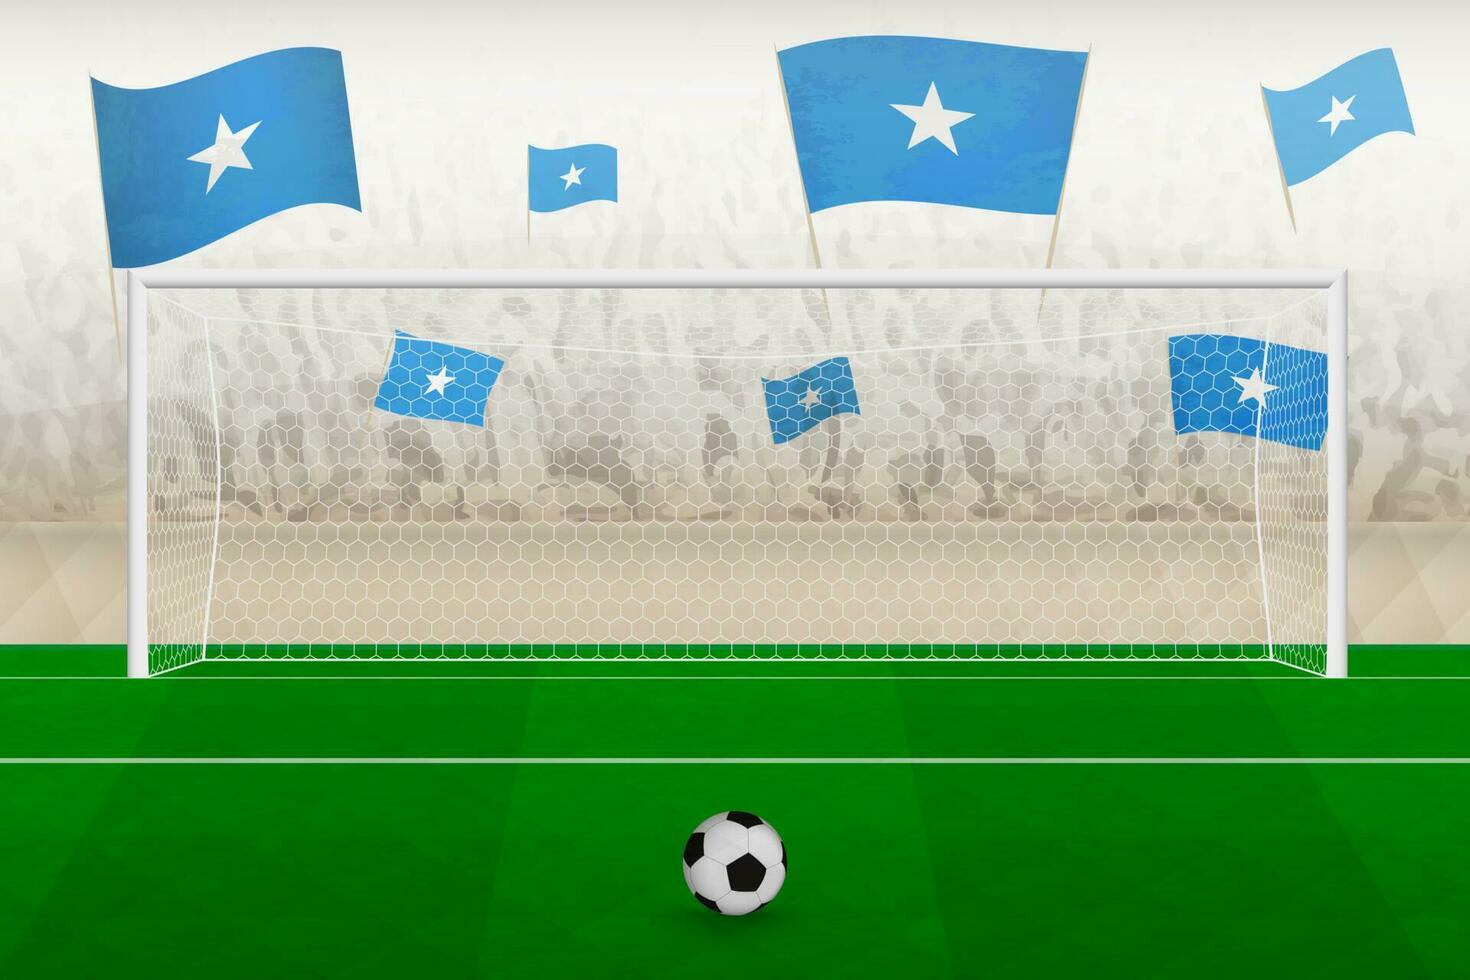 Somalia football team fans with flags of Somalia cheering on stadium, penalty kick concept in a soccer match. vector